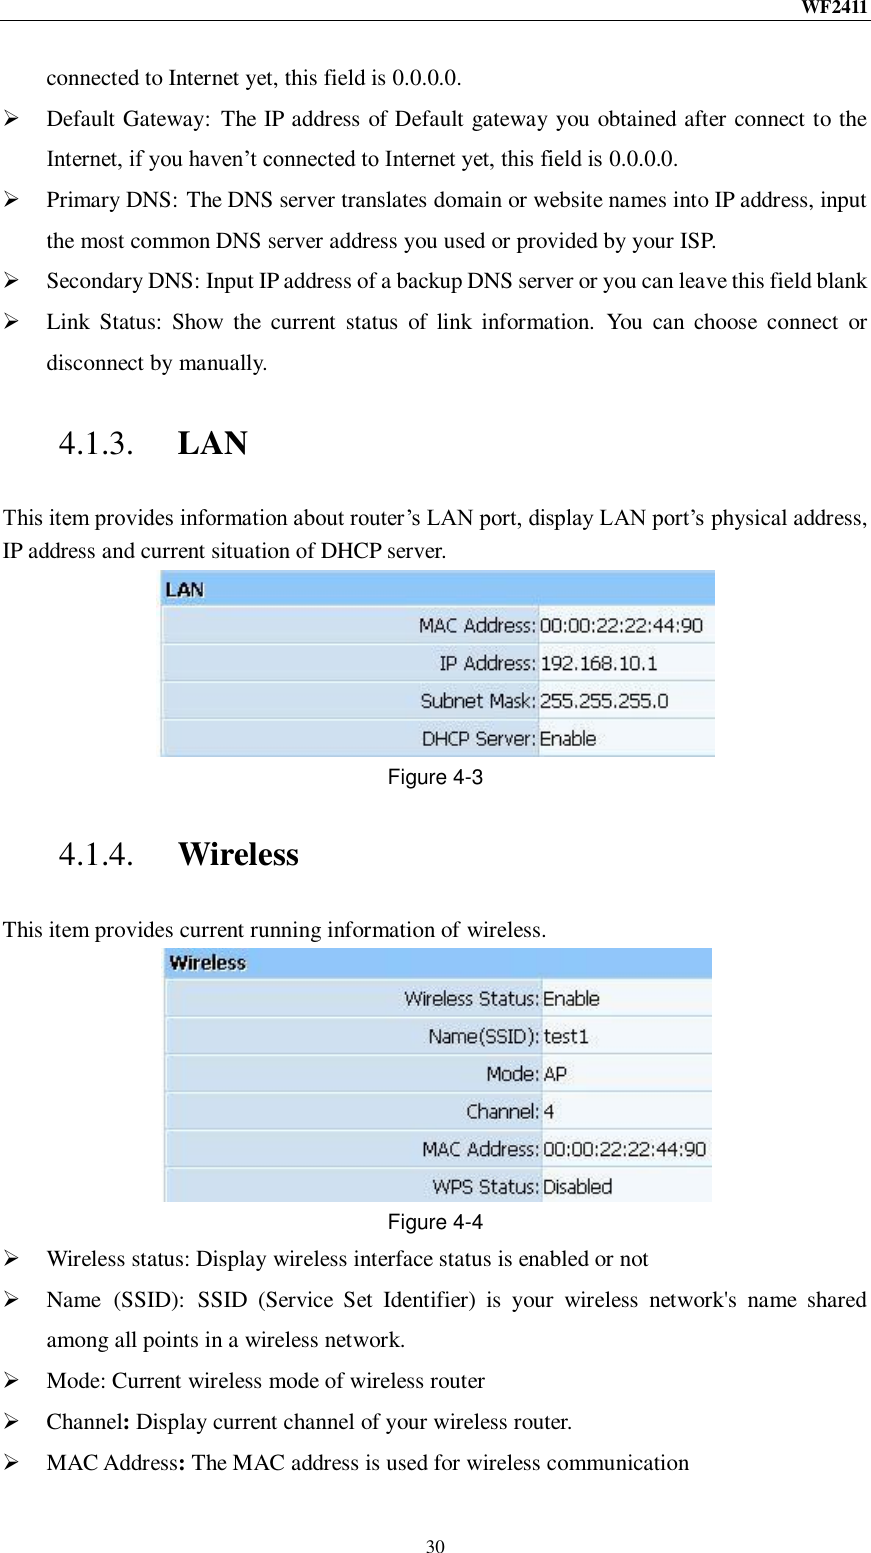 WF2411  30 connected to Internet yet, this field is 0.0.0.0.  Default Gateway:  The IP address of Default gateway you obtained after connect to the Internet, if you haven‟t connected to Internet yet, this field is 0.0.0.0.  Primary DNS: The DNS server translates domain or website names into IP address, input the most common DNS server address you used or provided by your ISP.  Secondary DNS: Input IP address of a backup DNS server or you can leave this field blank  Link  Status:  Show  the  current  status  of  link  information.  You  can  choose  connect  or disconnect by manually. 4.1.3. LAN This item provides information about router‟s LAN port, display LAN port‟s physical address, IP address and current situation of DHCP server.  Figure 4-3 4.1.4. Wireless This item provides current running information of wireless.  Figure 4-4  Wireless status: Display wireless interface status is enabled or not  Name  (SSID):  SSID  (Service  Set  Identifier)  is  your  wireless  network&apos;s  name  shared among all points in a wireless network.  Mode: Current wireless mode of wireless router    Channel: Display current channel of your wireless router.  MAC Address: The MAC address is used for wireless communication 